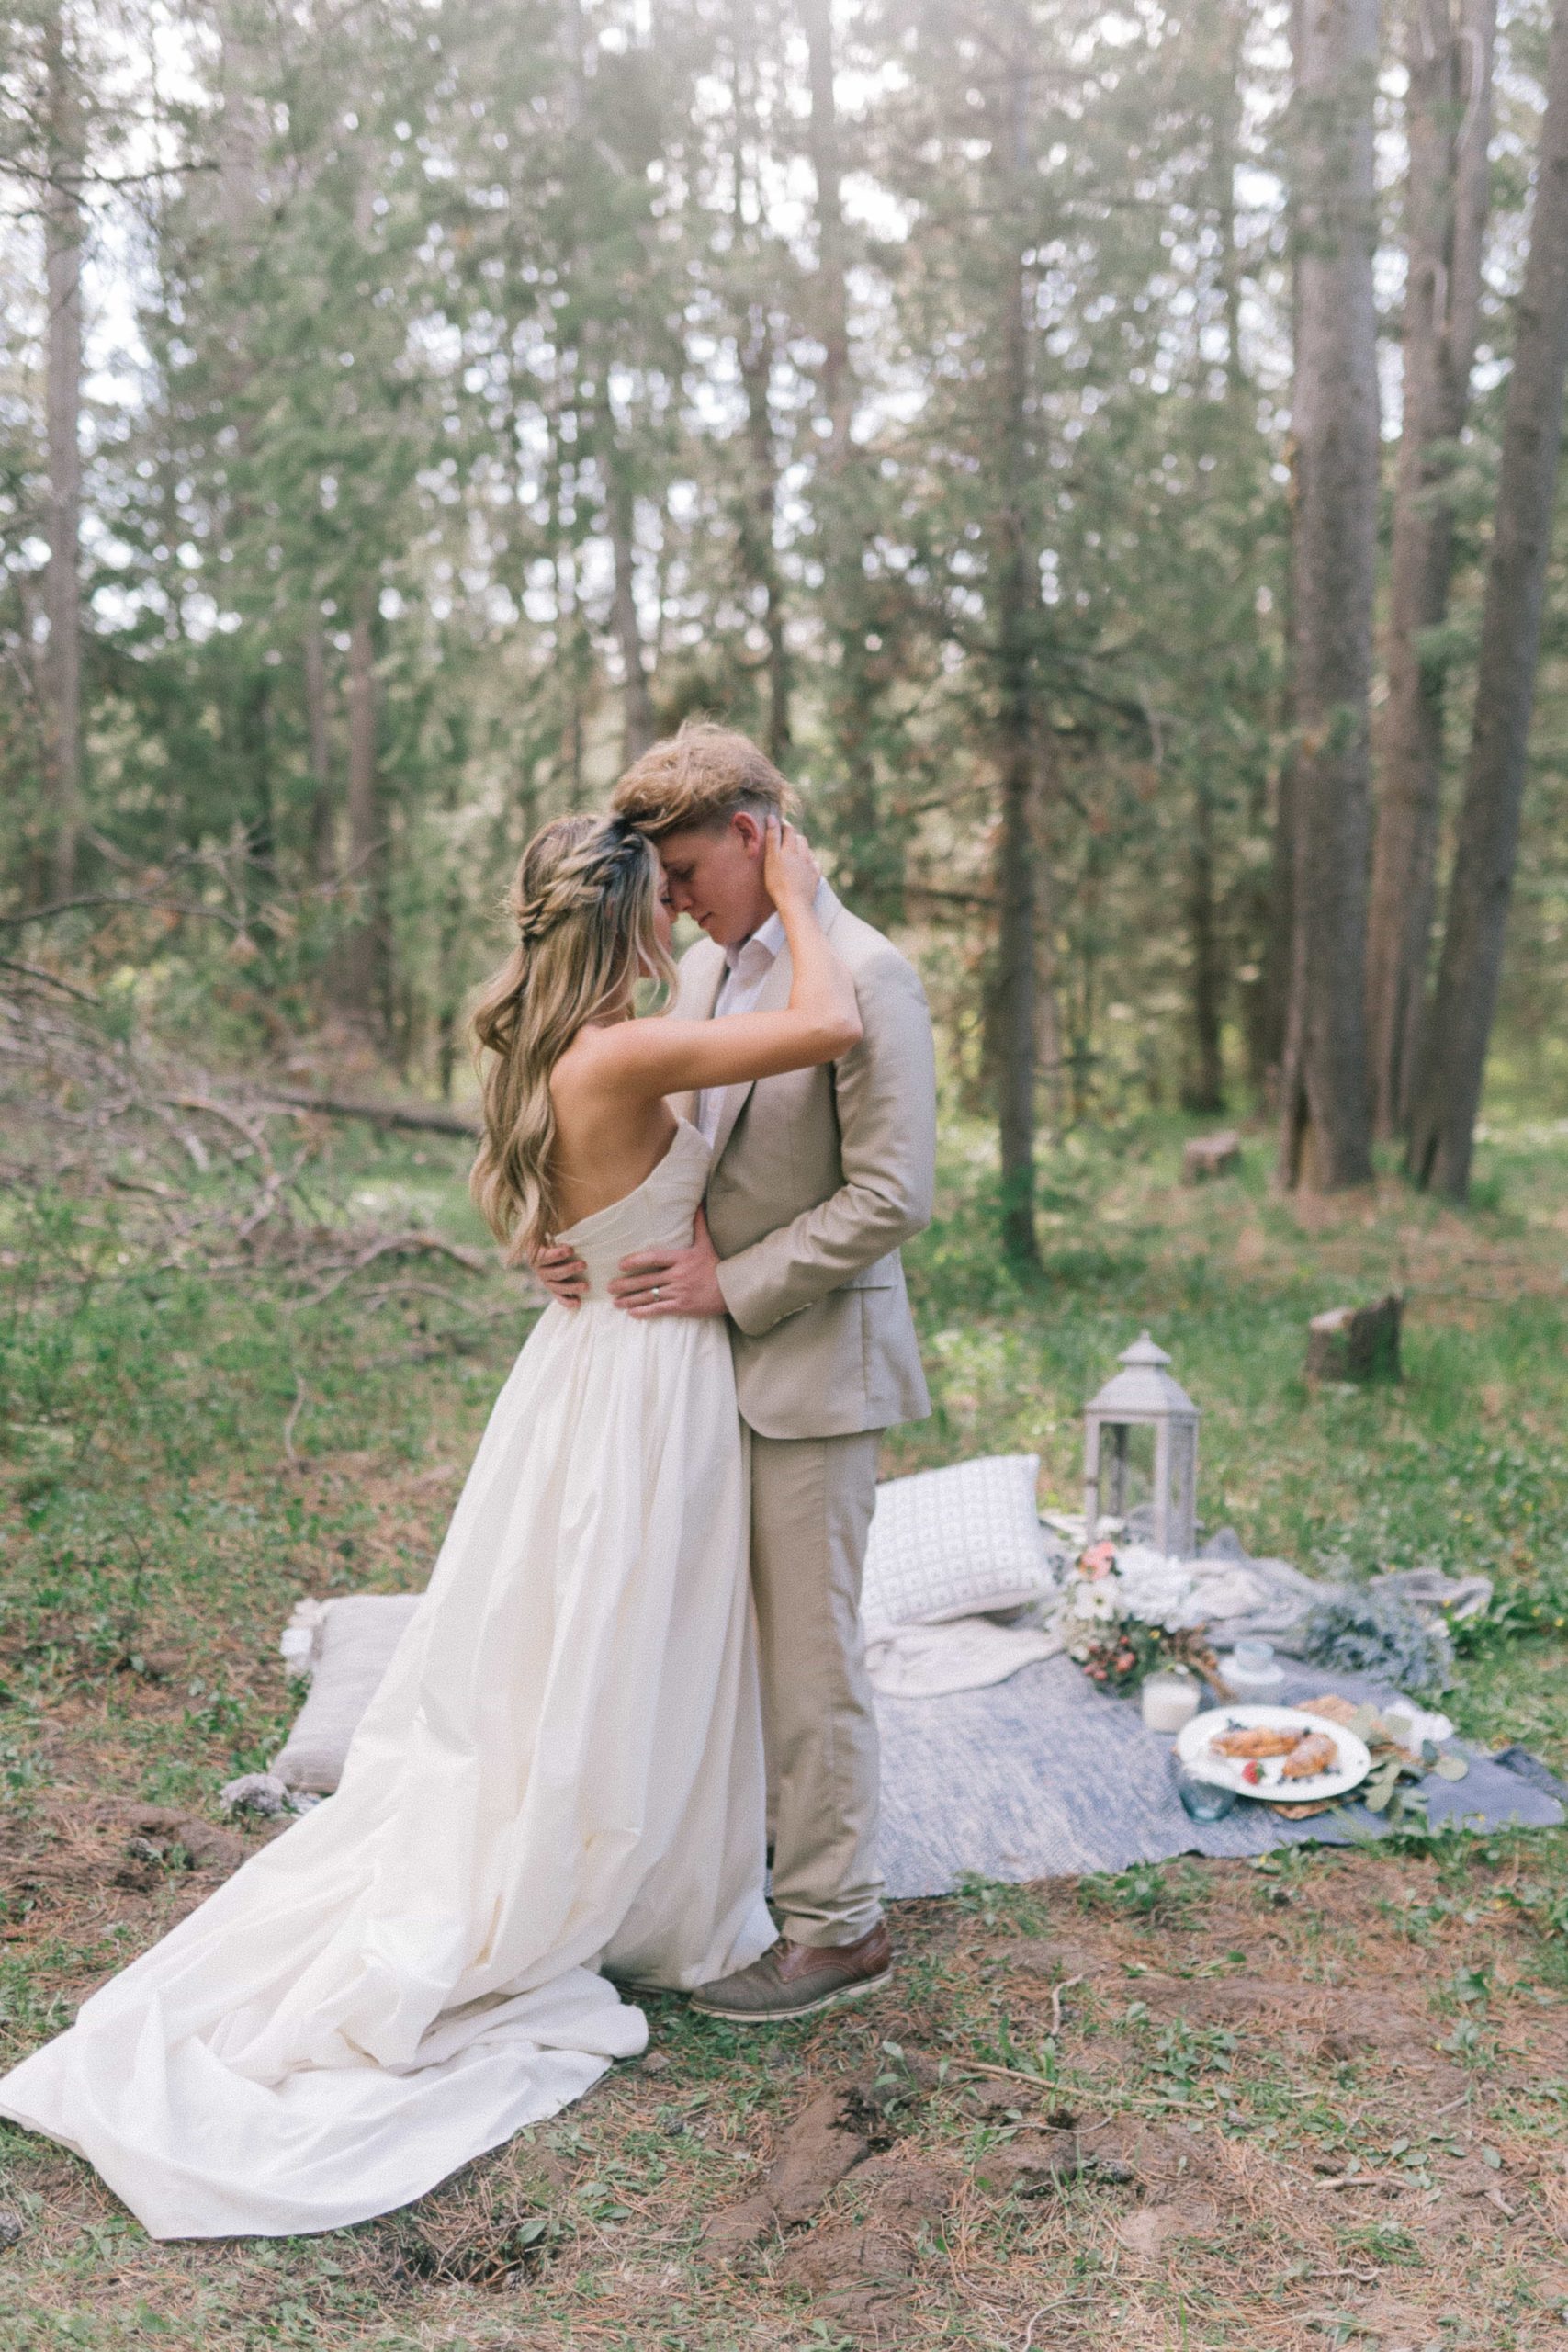 Bride and Groom standing holding each other in front of a picnic in the forest